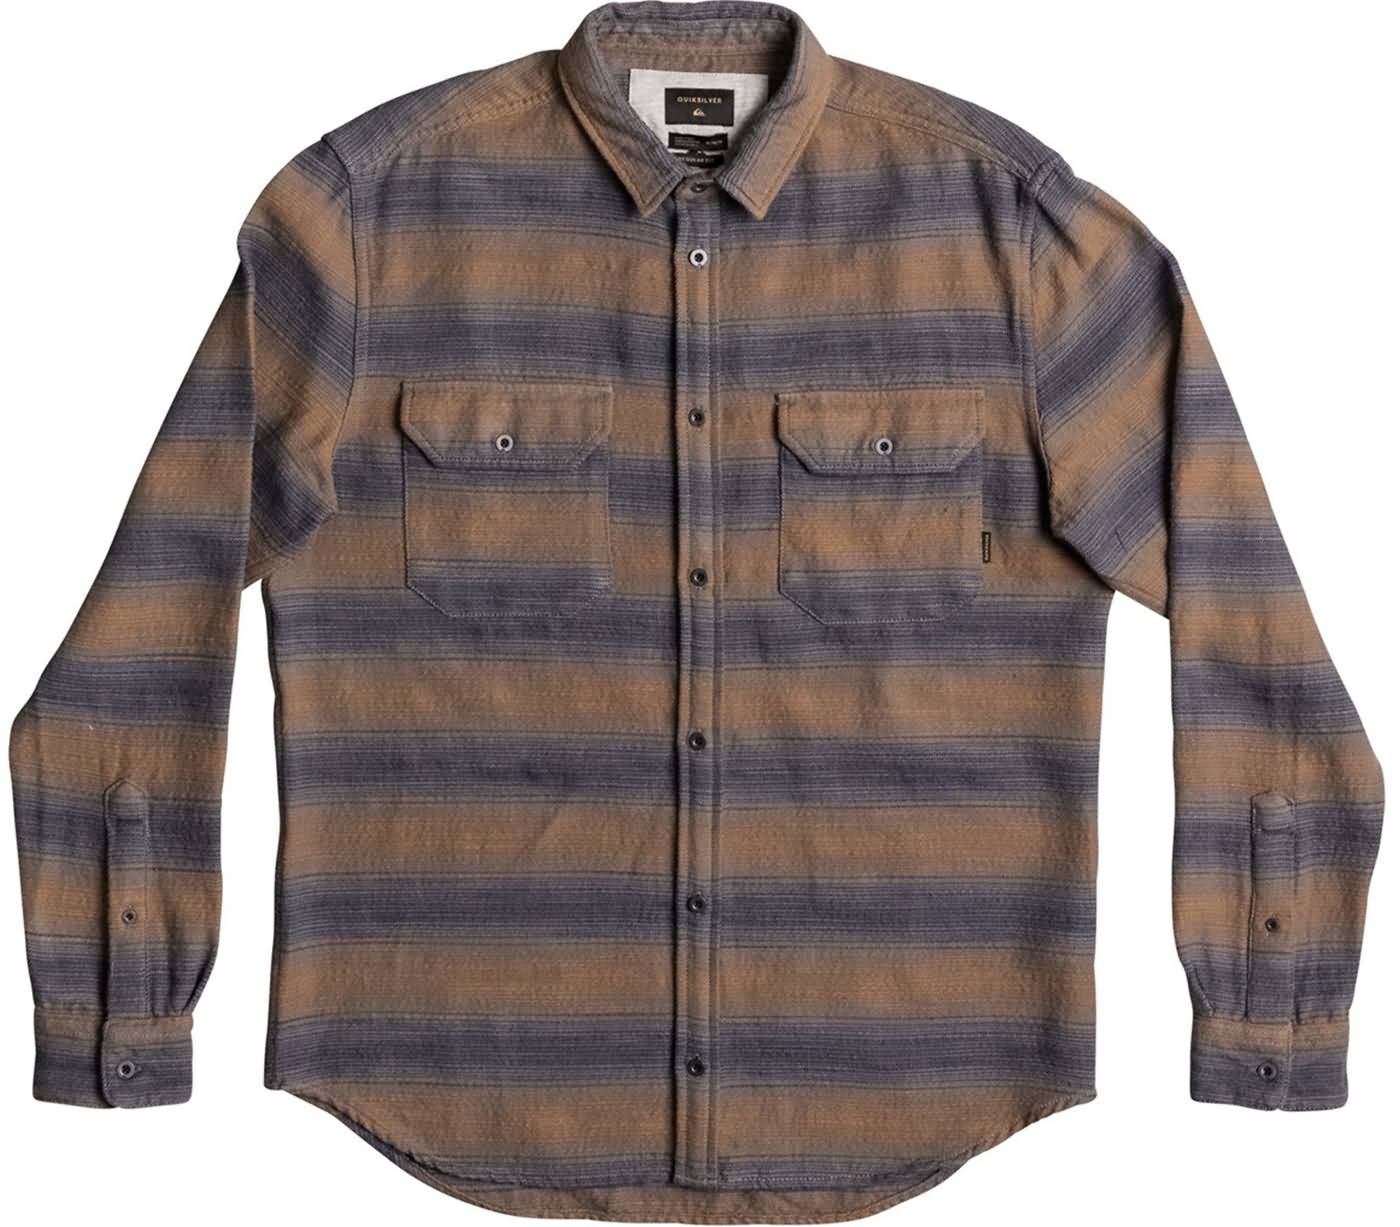 Quiksilver Surf Fall 2017 Mens Flannel Shirts Apparel Preview